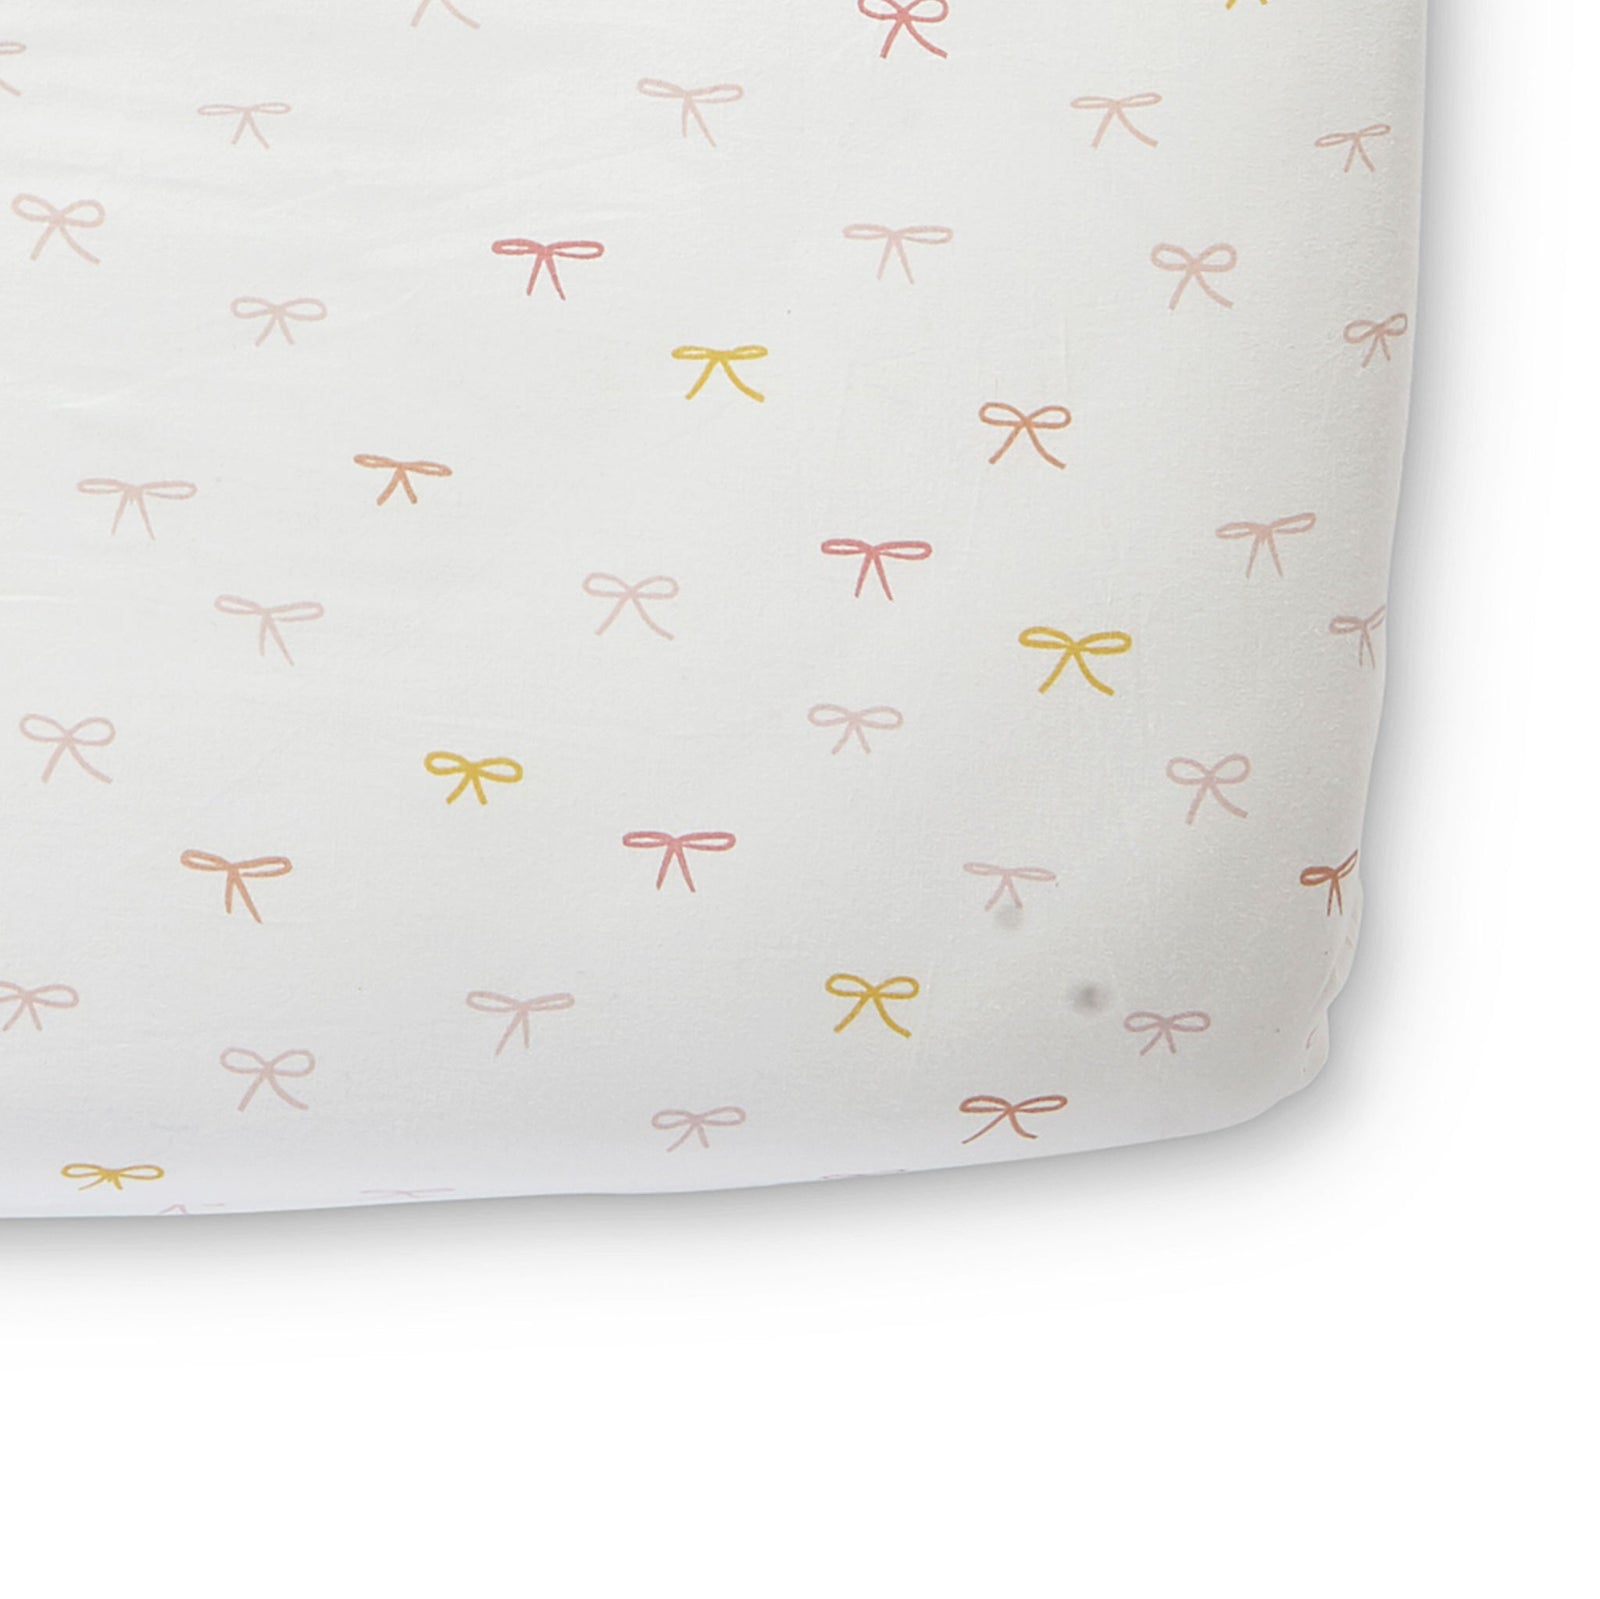 Pehr Jolie Organic Crib Sheet. GOTS Certified Organic Cotton. Screen printed by hand using AZO-Free dyes. White with colourful bows.